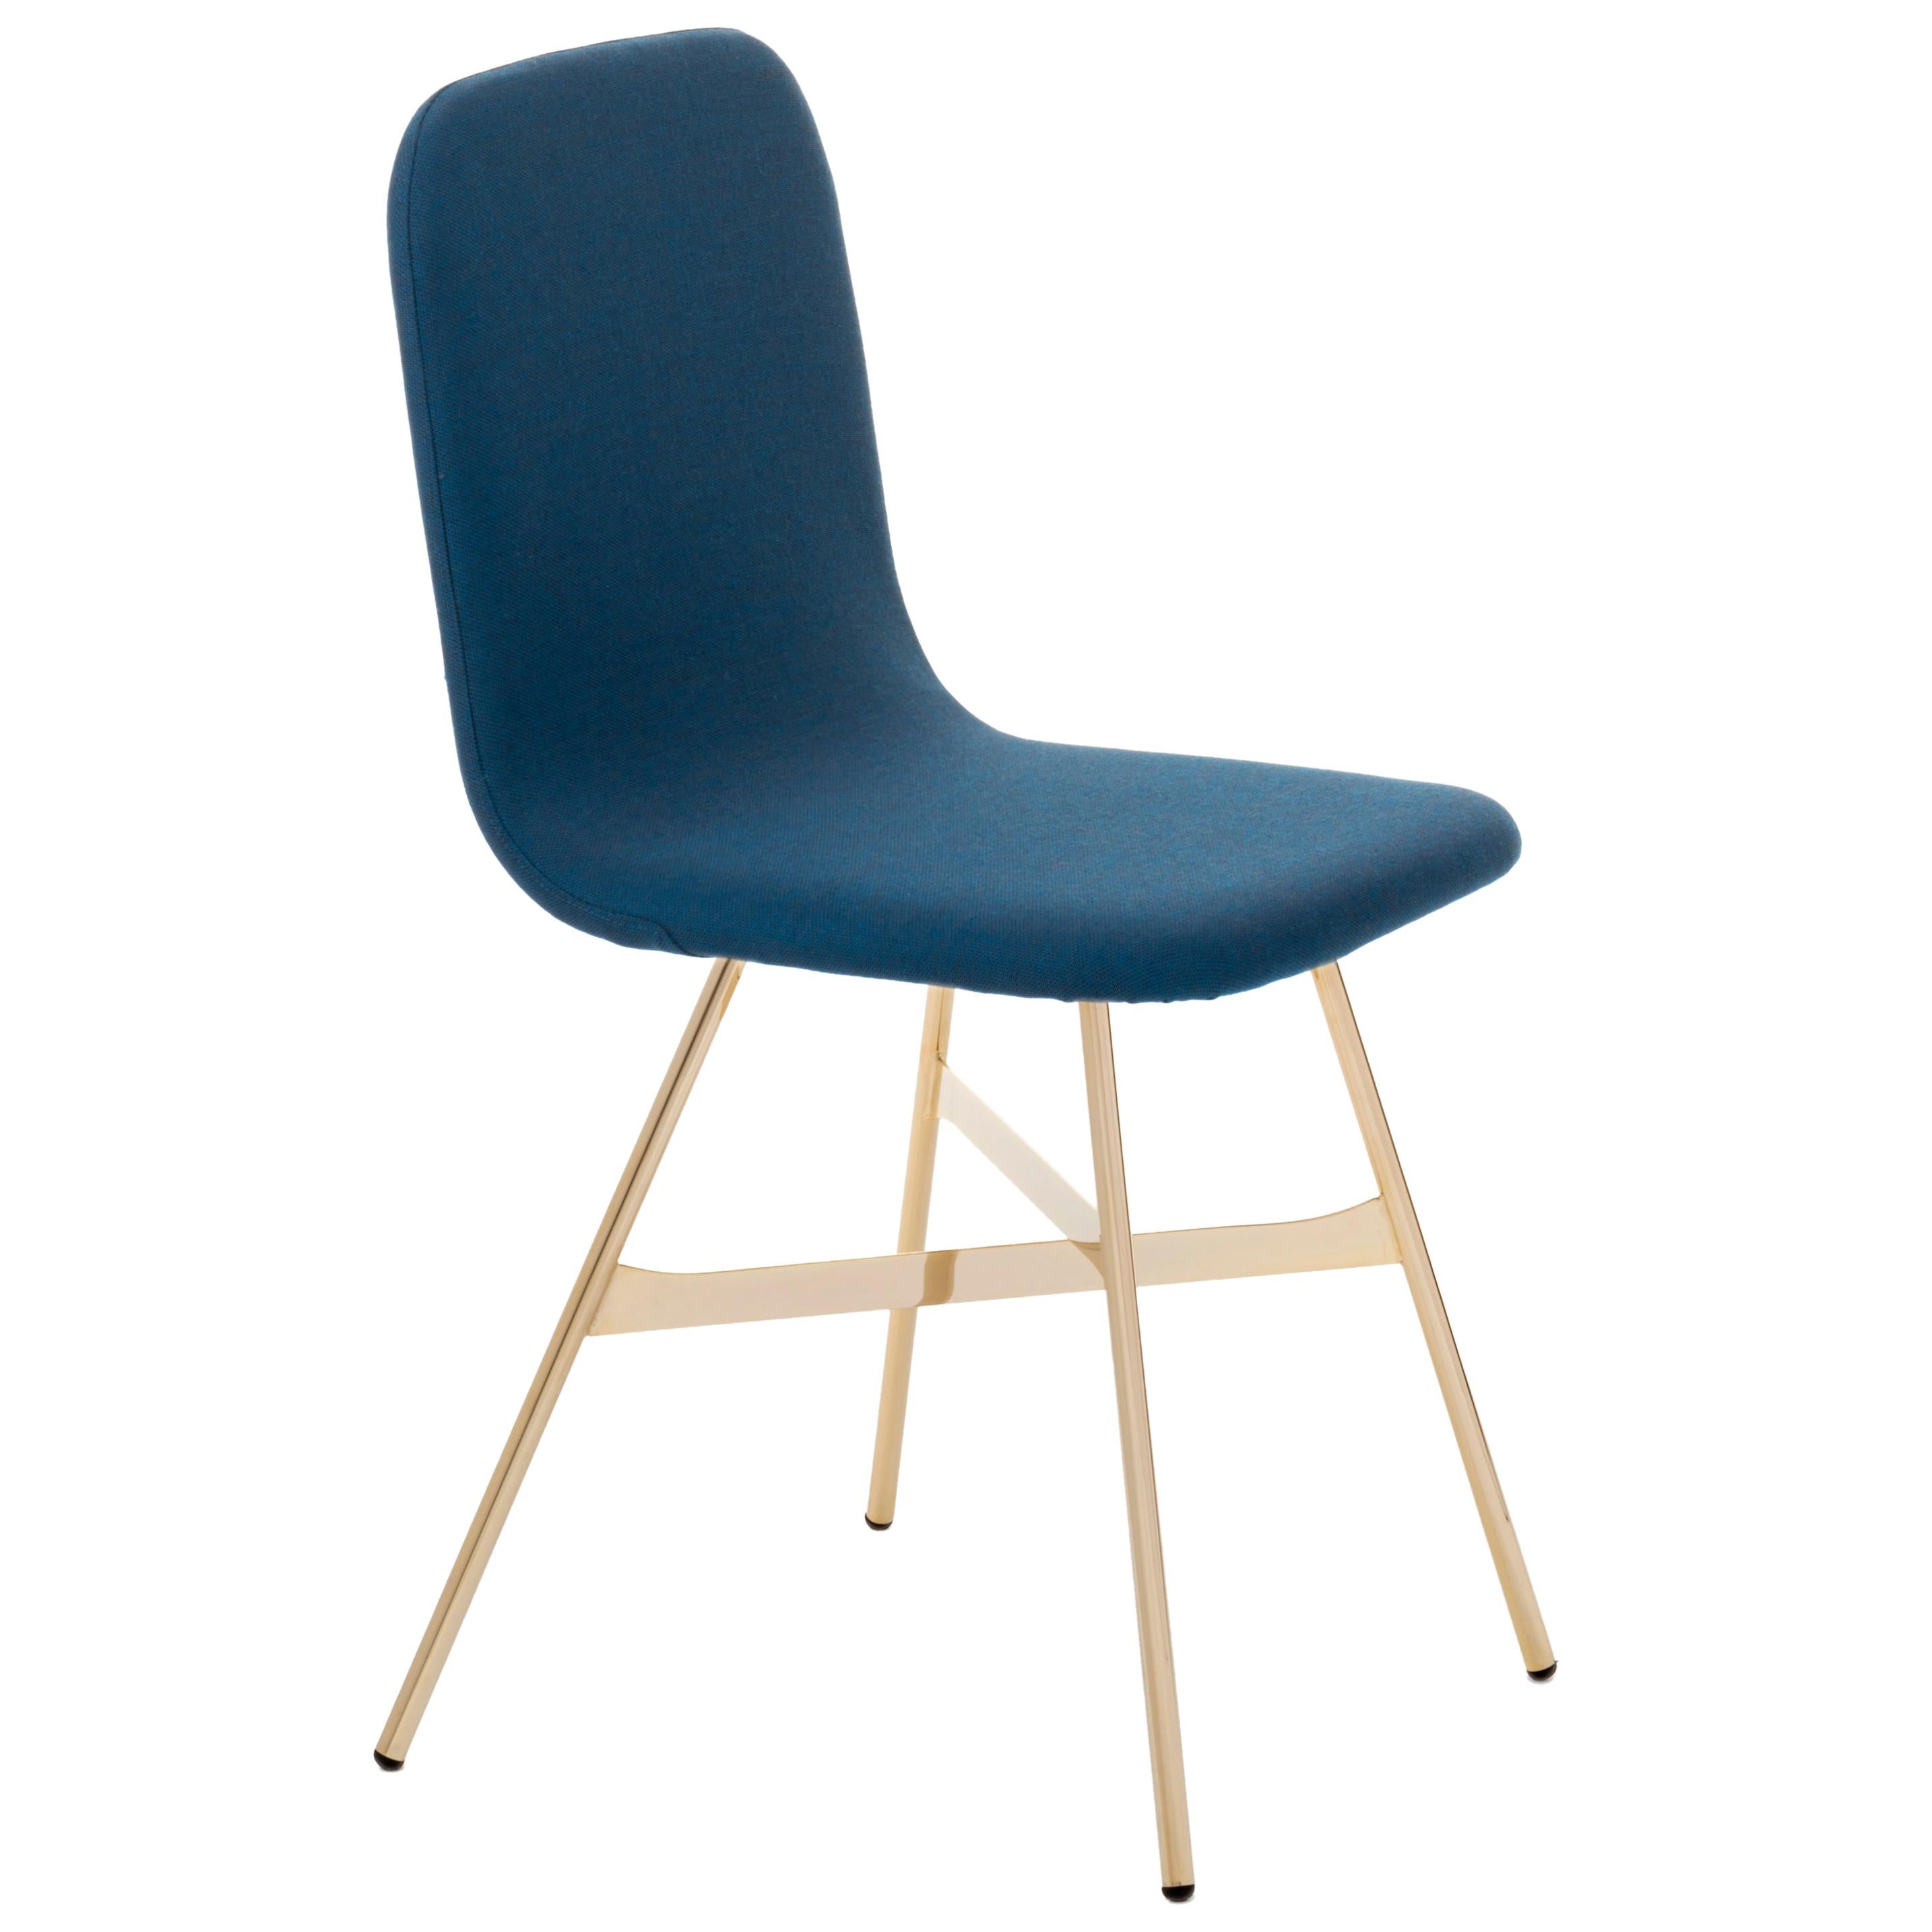 Paint Tria Simple Chair Golden Legs Upholstered in Mint Green Velvet Made in Italy For Sale